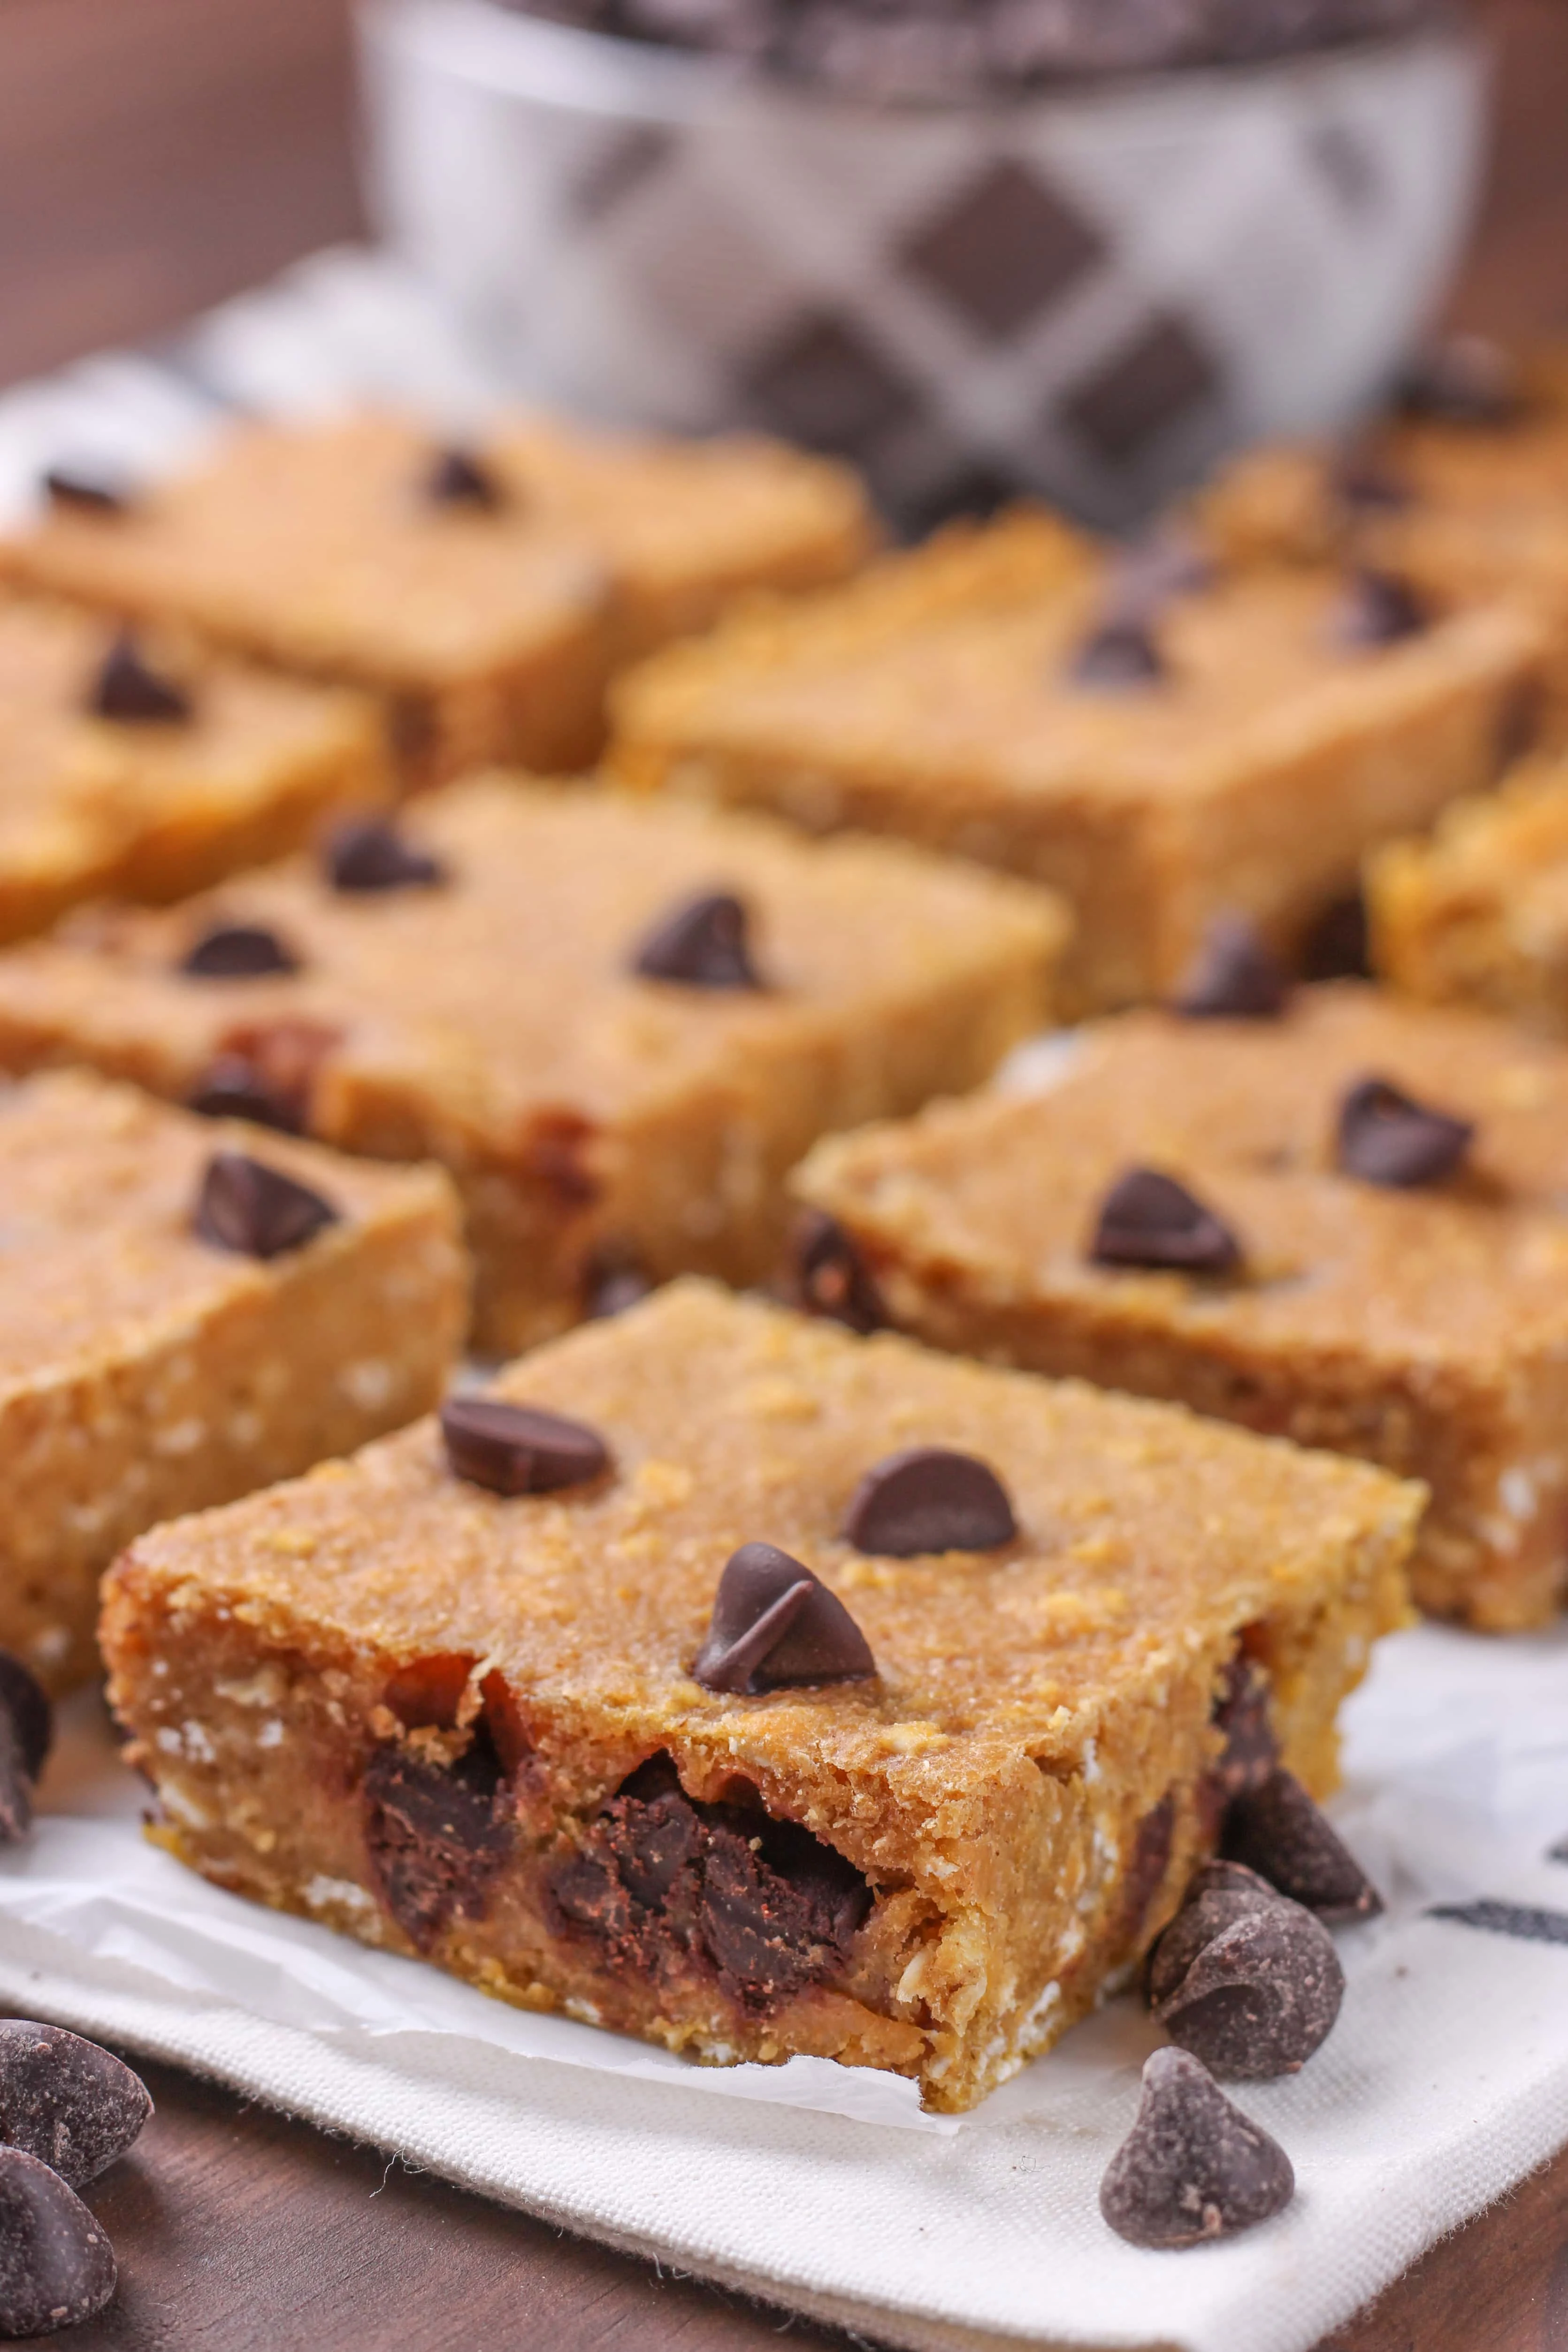 Whole Wheat Chocolate Chip Pumpkin Snack Bars Recipe from A Kitchen Addiction